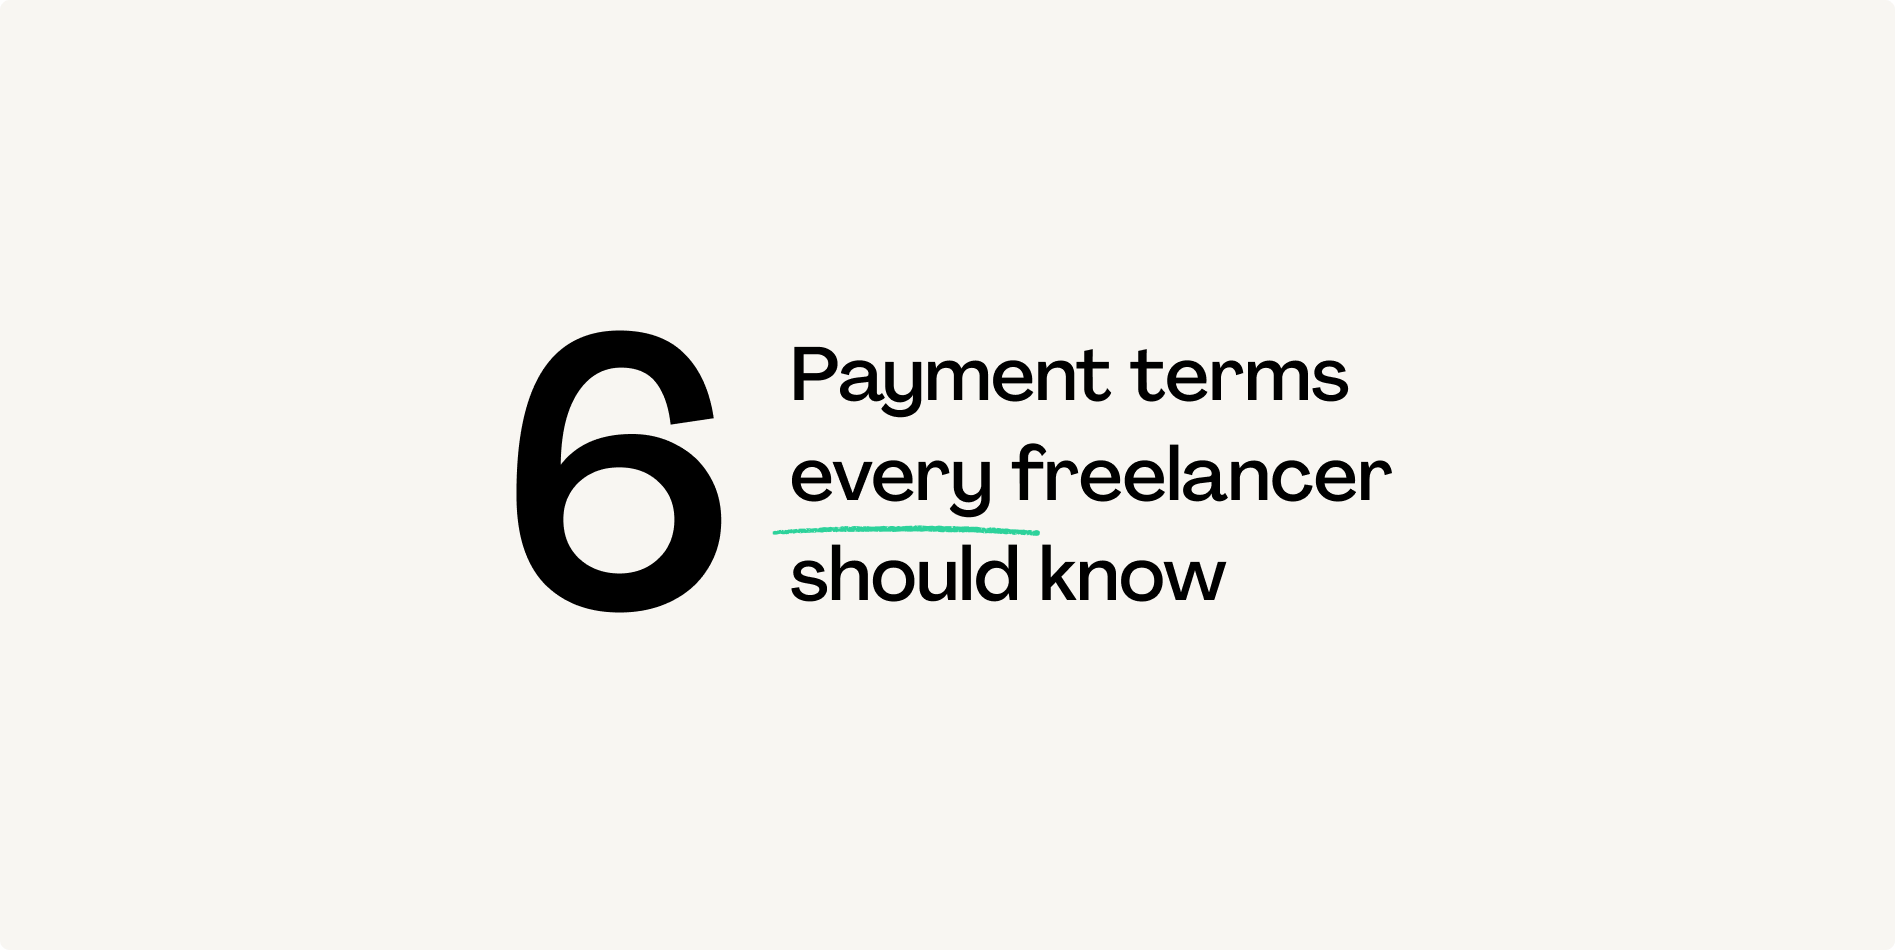 6 Payment terms every freelancer should know